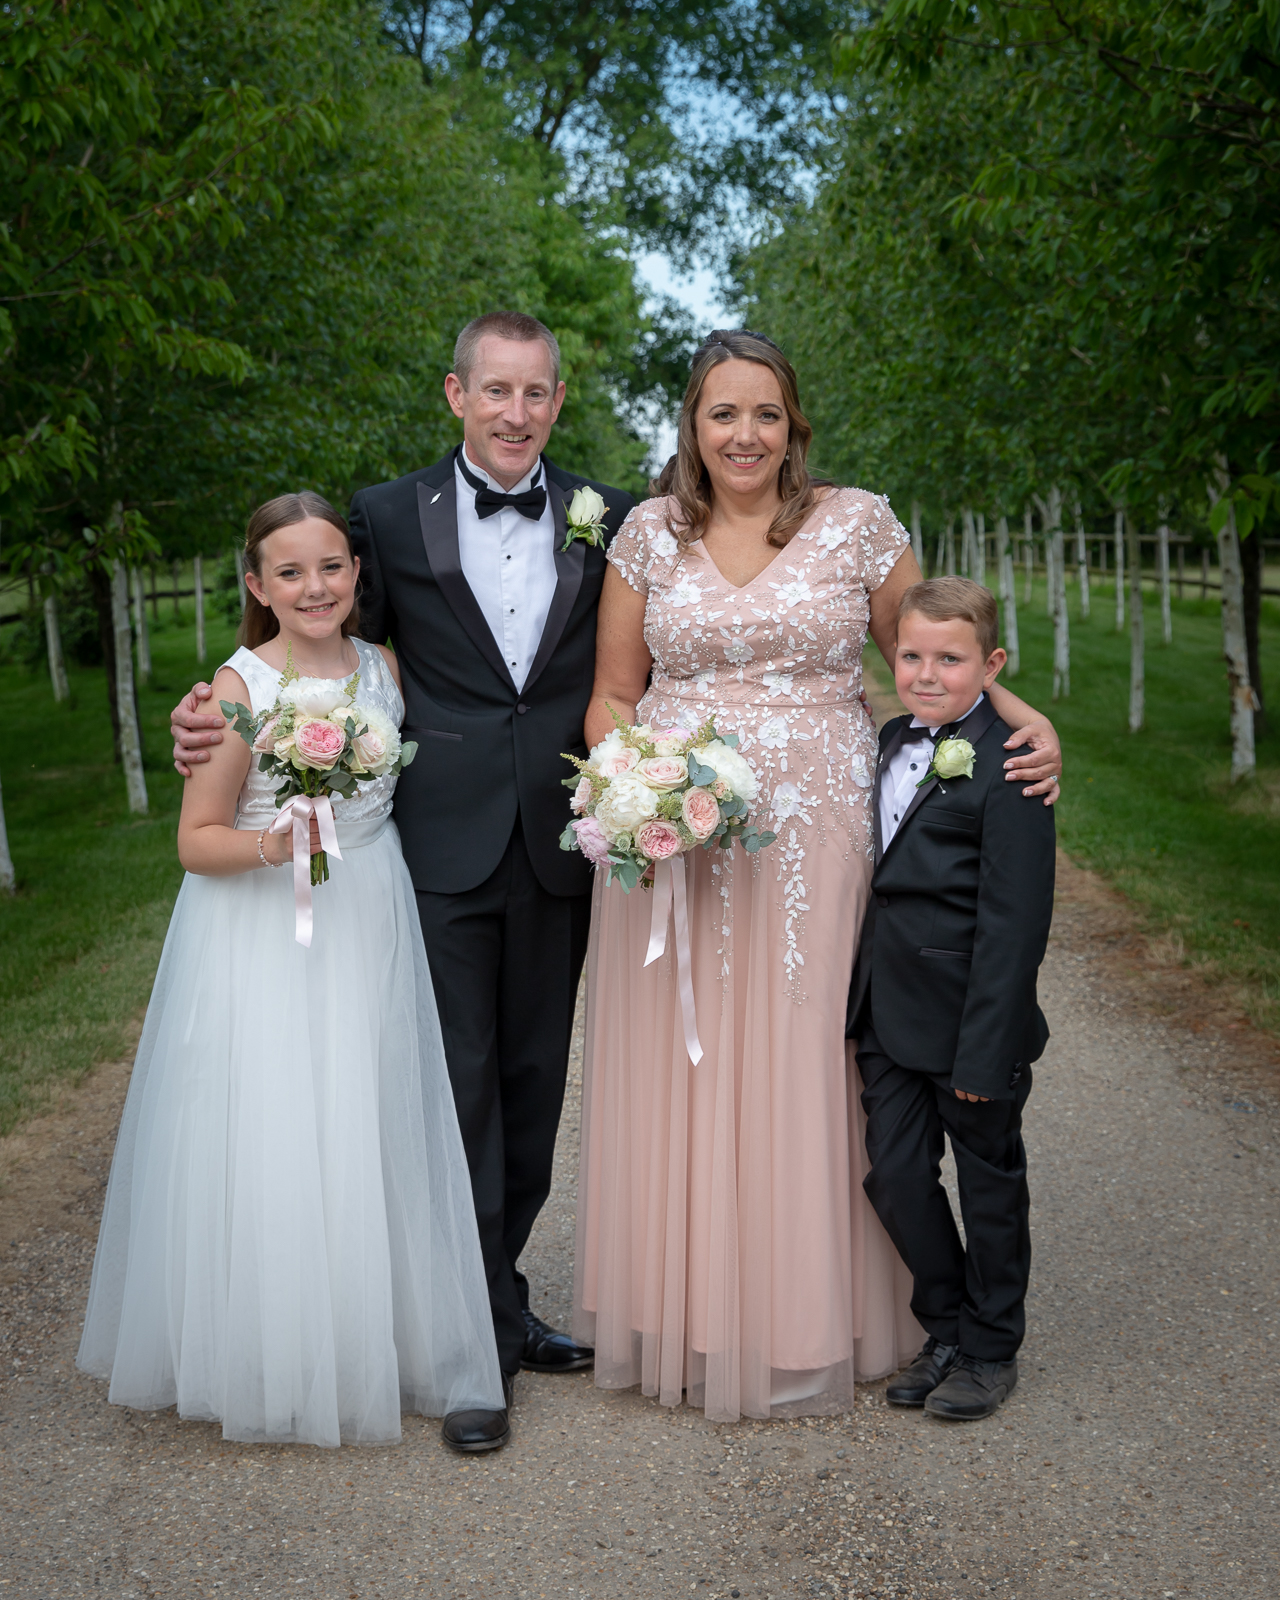 Rebecca and Jonathan Muggleton with their two children on their wedding day